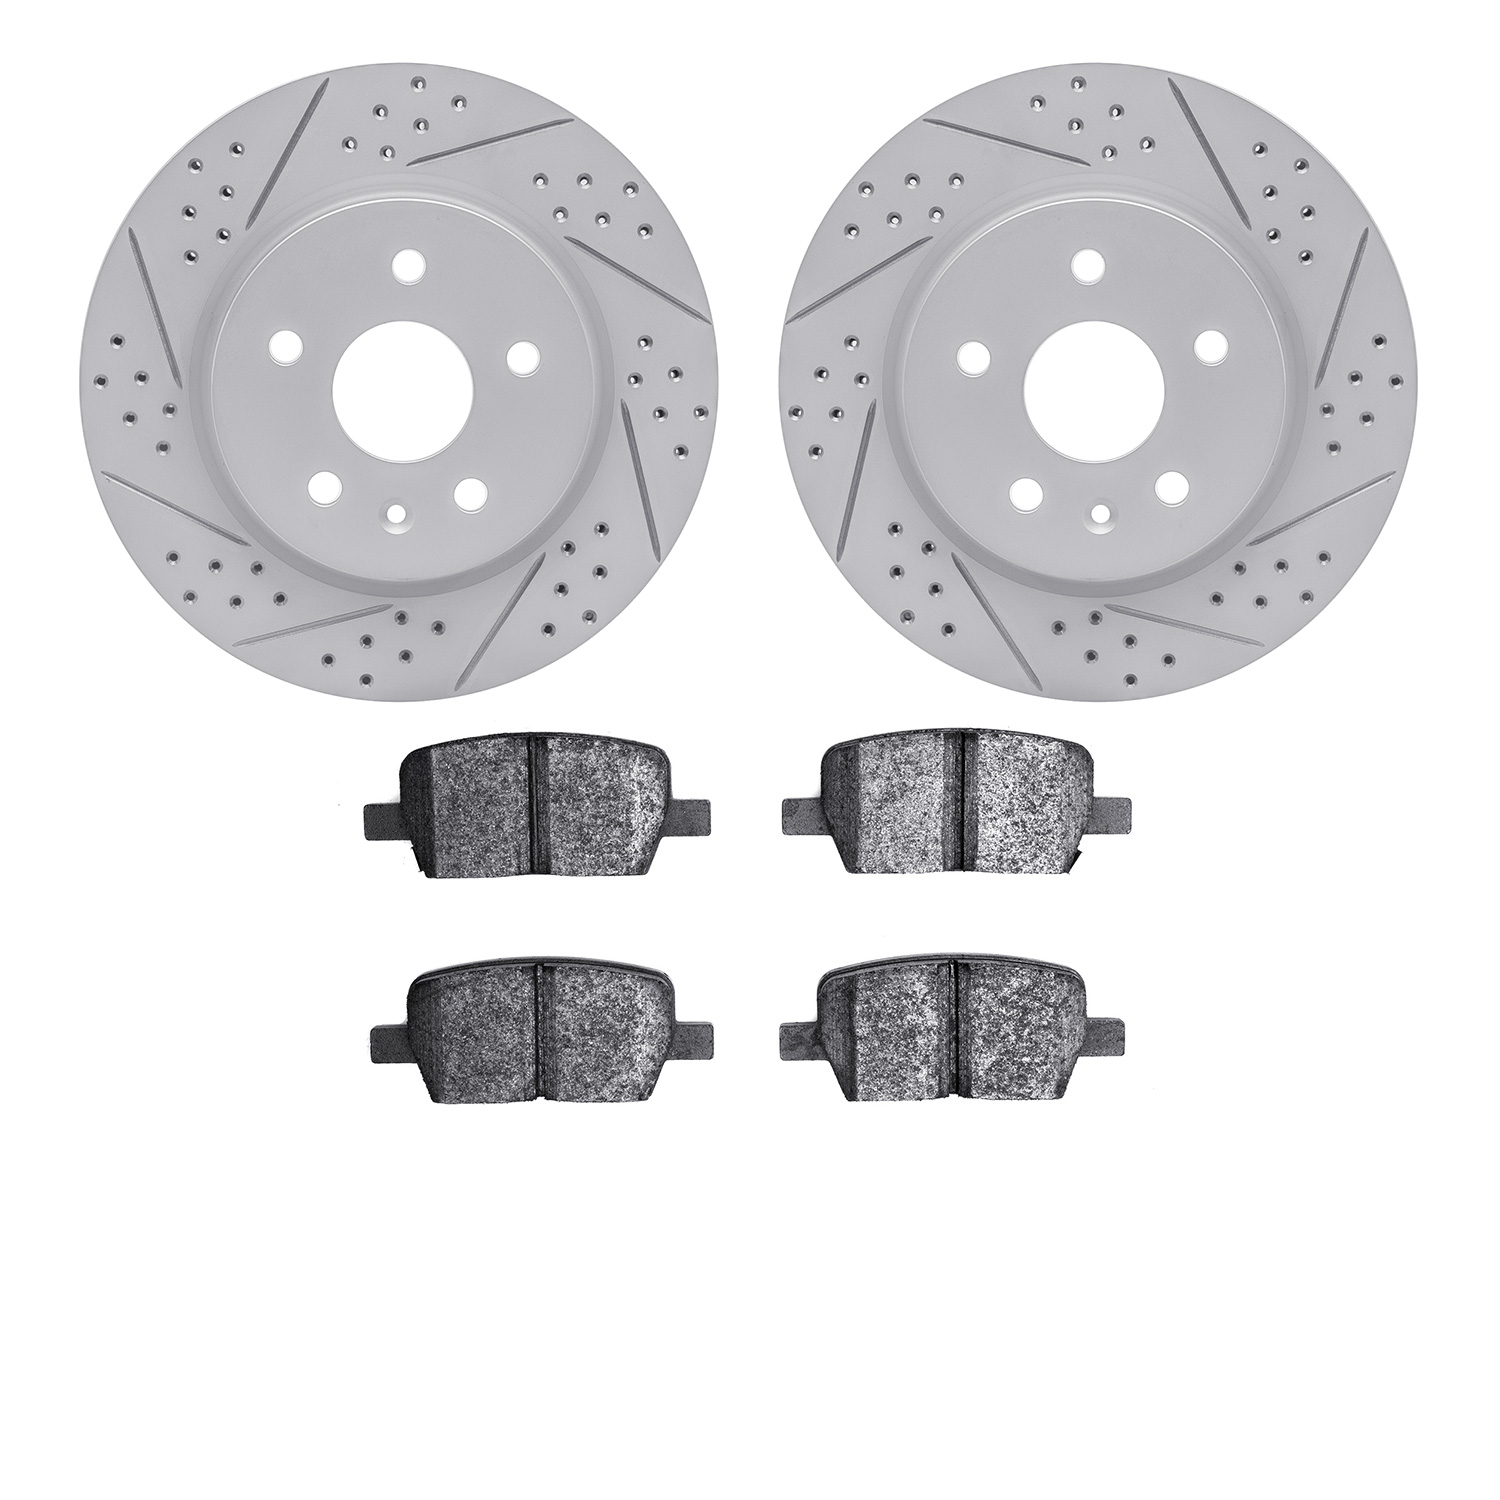 2502-65023 Geoperformance Drilled/Slotted Rotors w/5000 Advanced Brake Pads Kit, Fits Select GM, Position: Rear